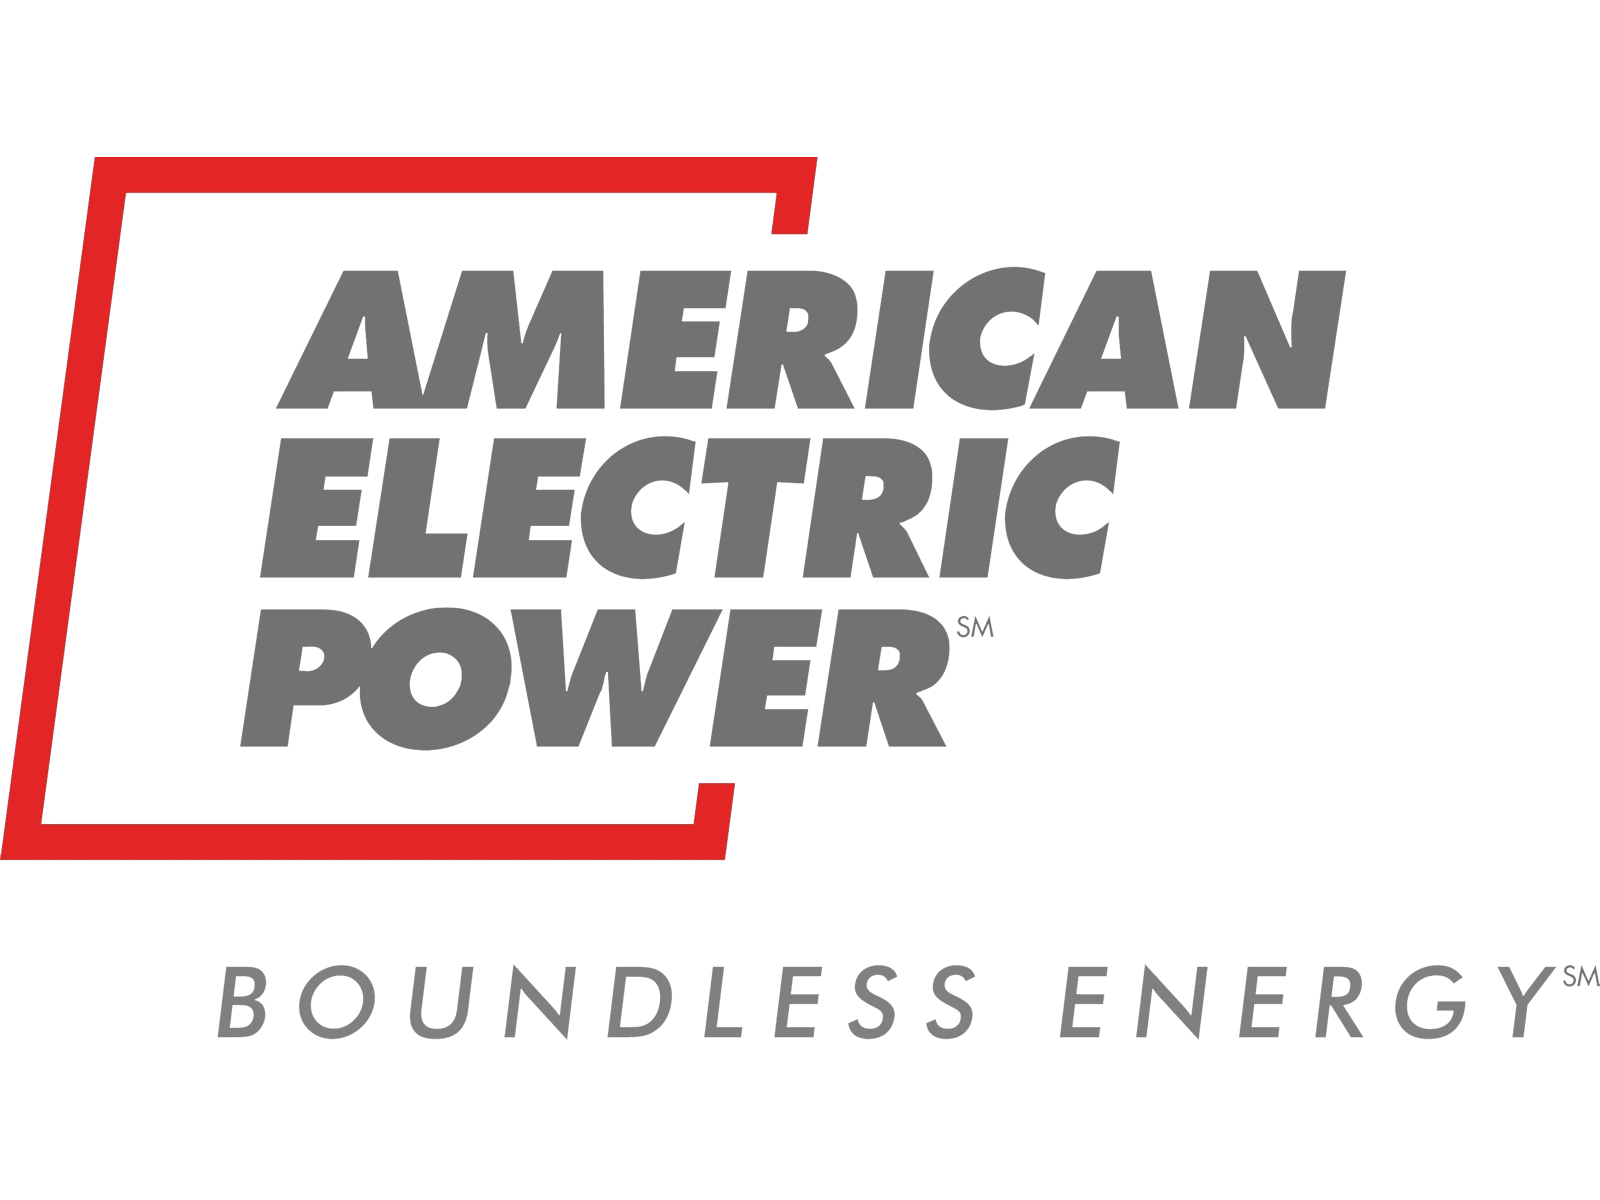 American Electric Power (AEP) is a major investor-owned electric utility in the United States of America, delivering electricity to more than five million customers in 11 states.